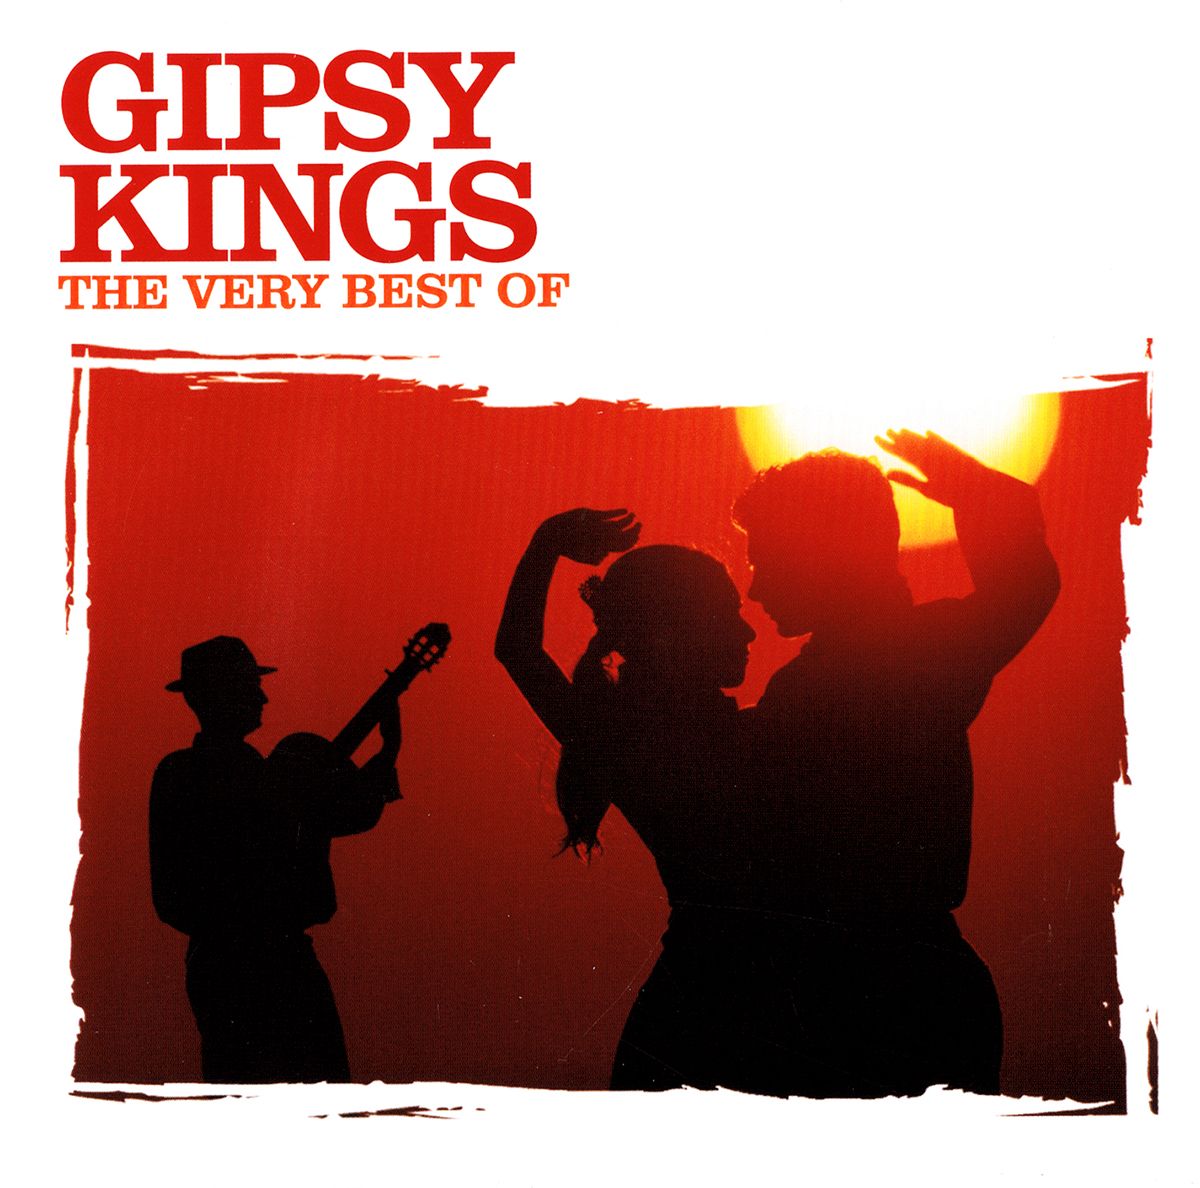 Gipsy Kings 2005 `the very best of`. Volare - the very best of Gipsy Kings. Gipsy Kings the very best of. Gipsy Kings best. Gipsy kings no volvere